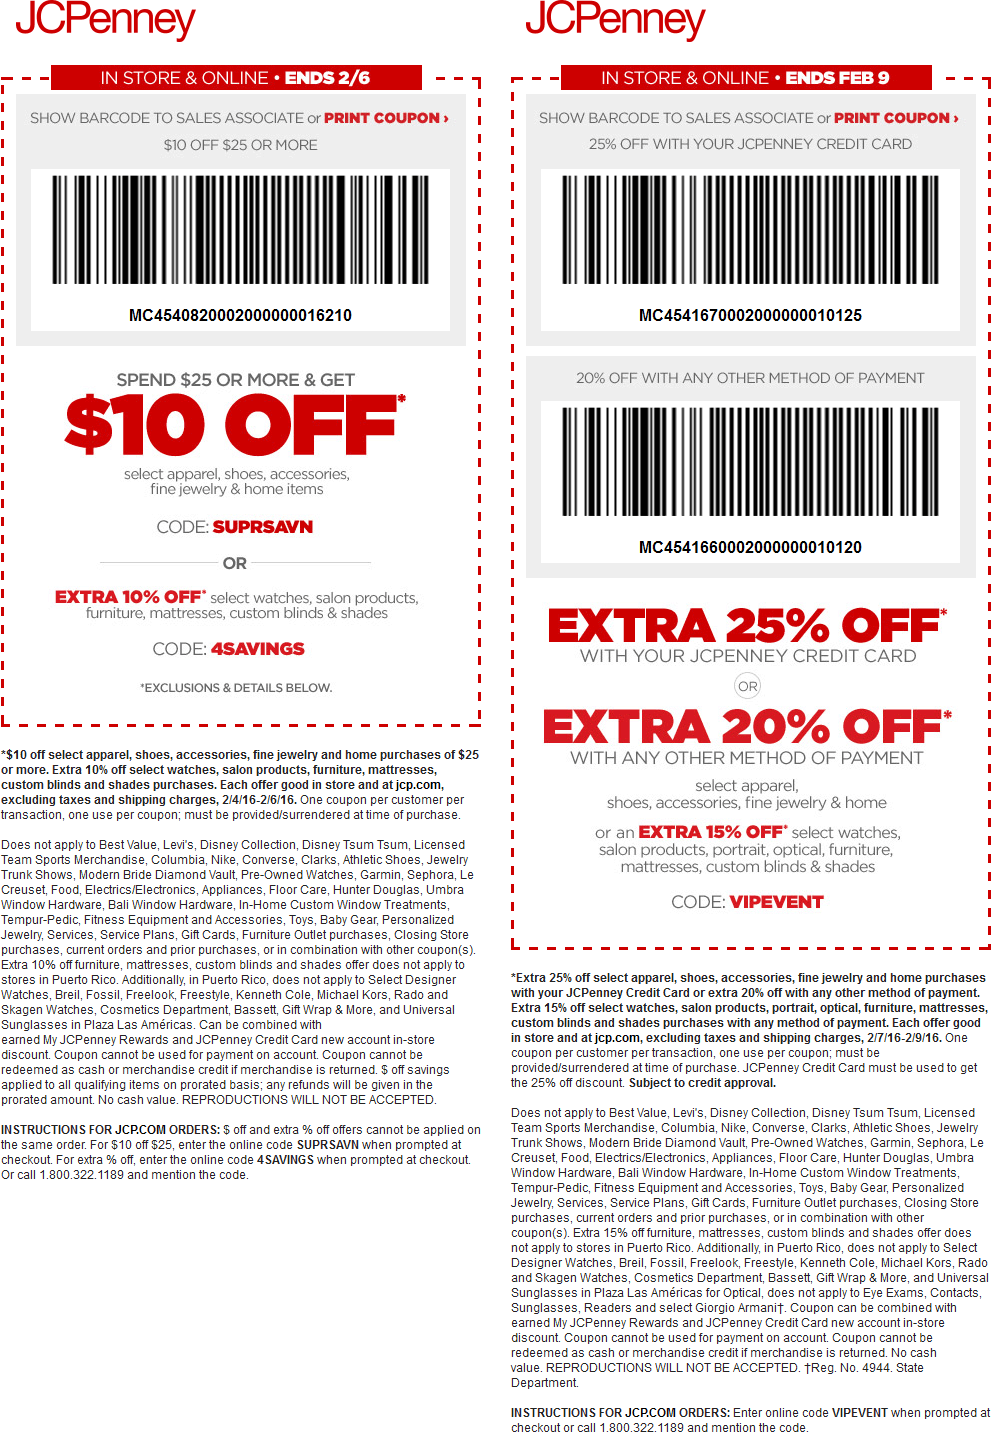 jcpenney portrait coupons cost